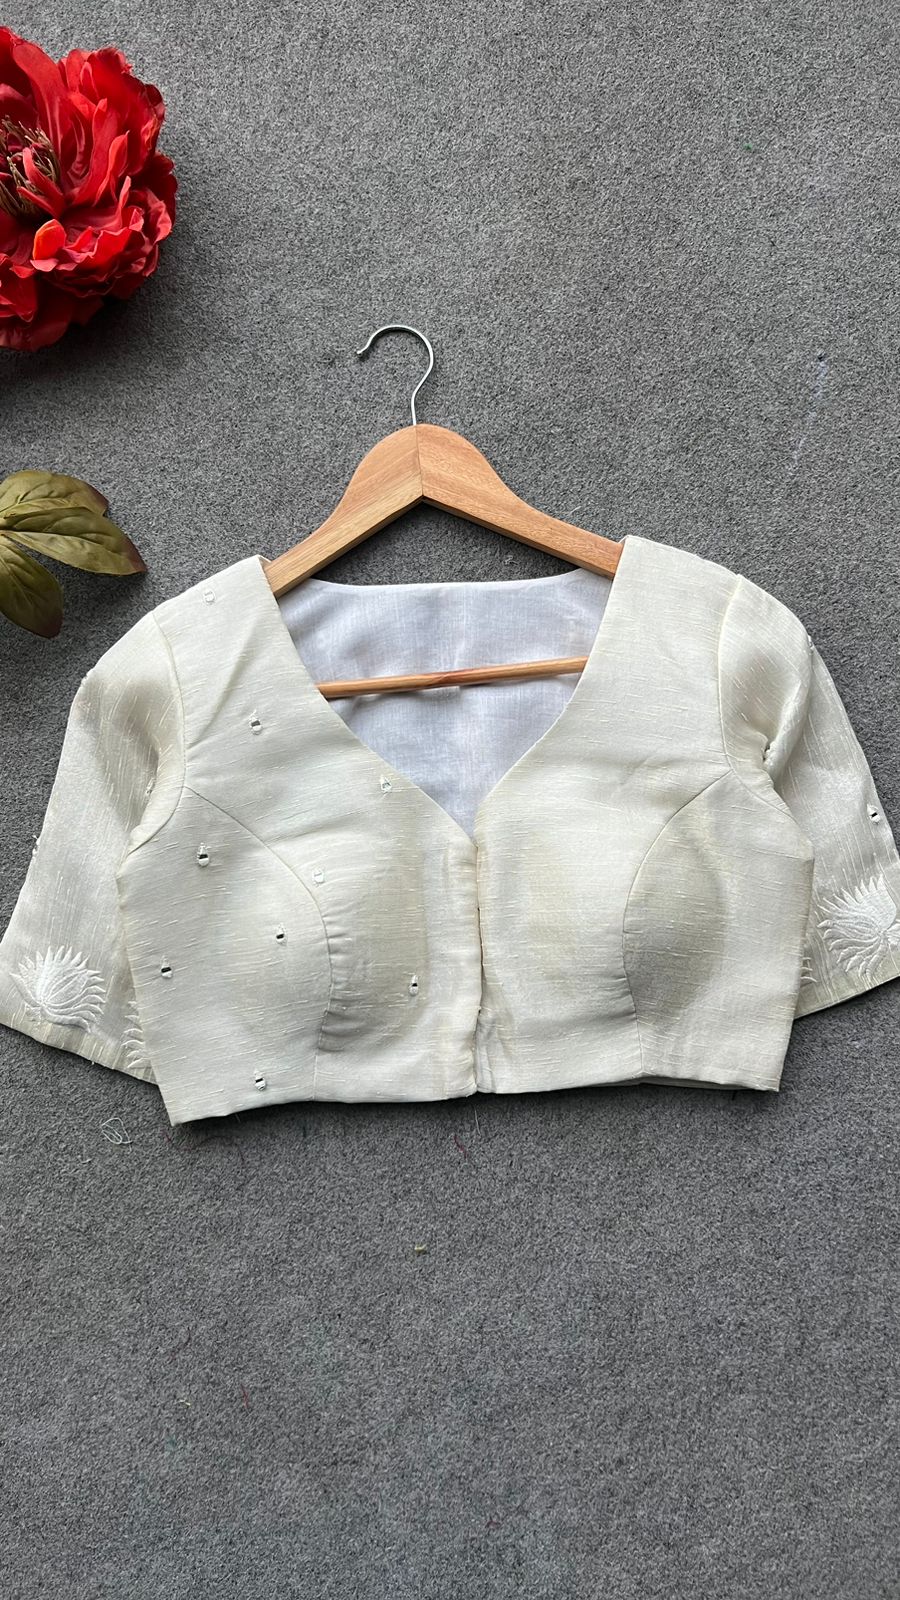 Silver tissue mirror embroidery work blouse